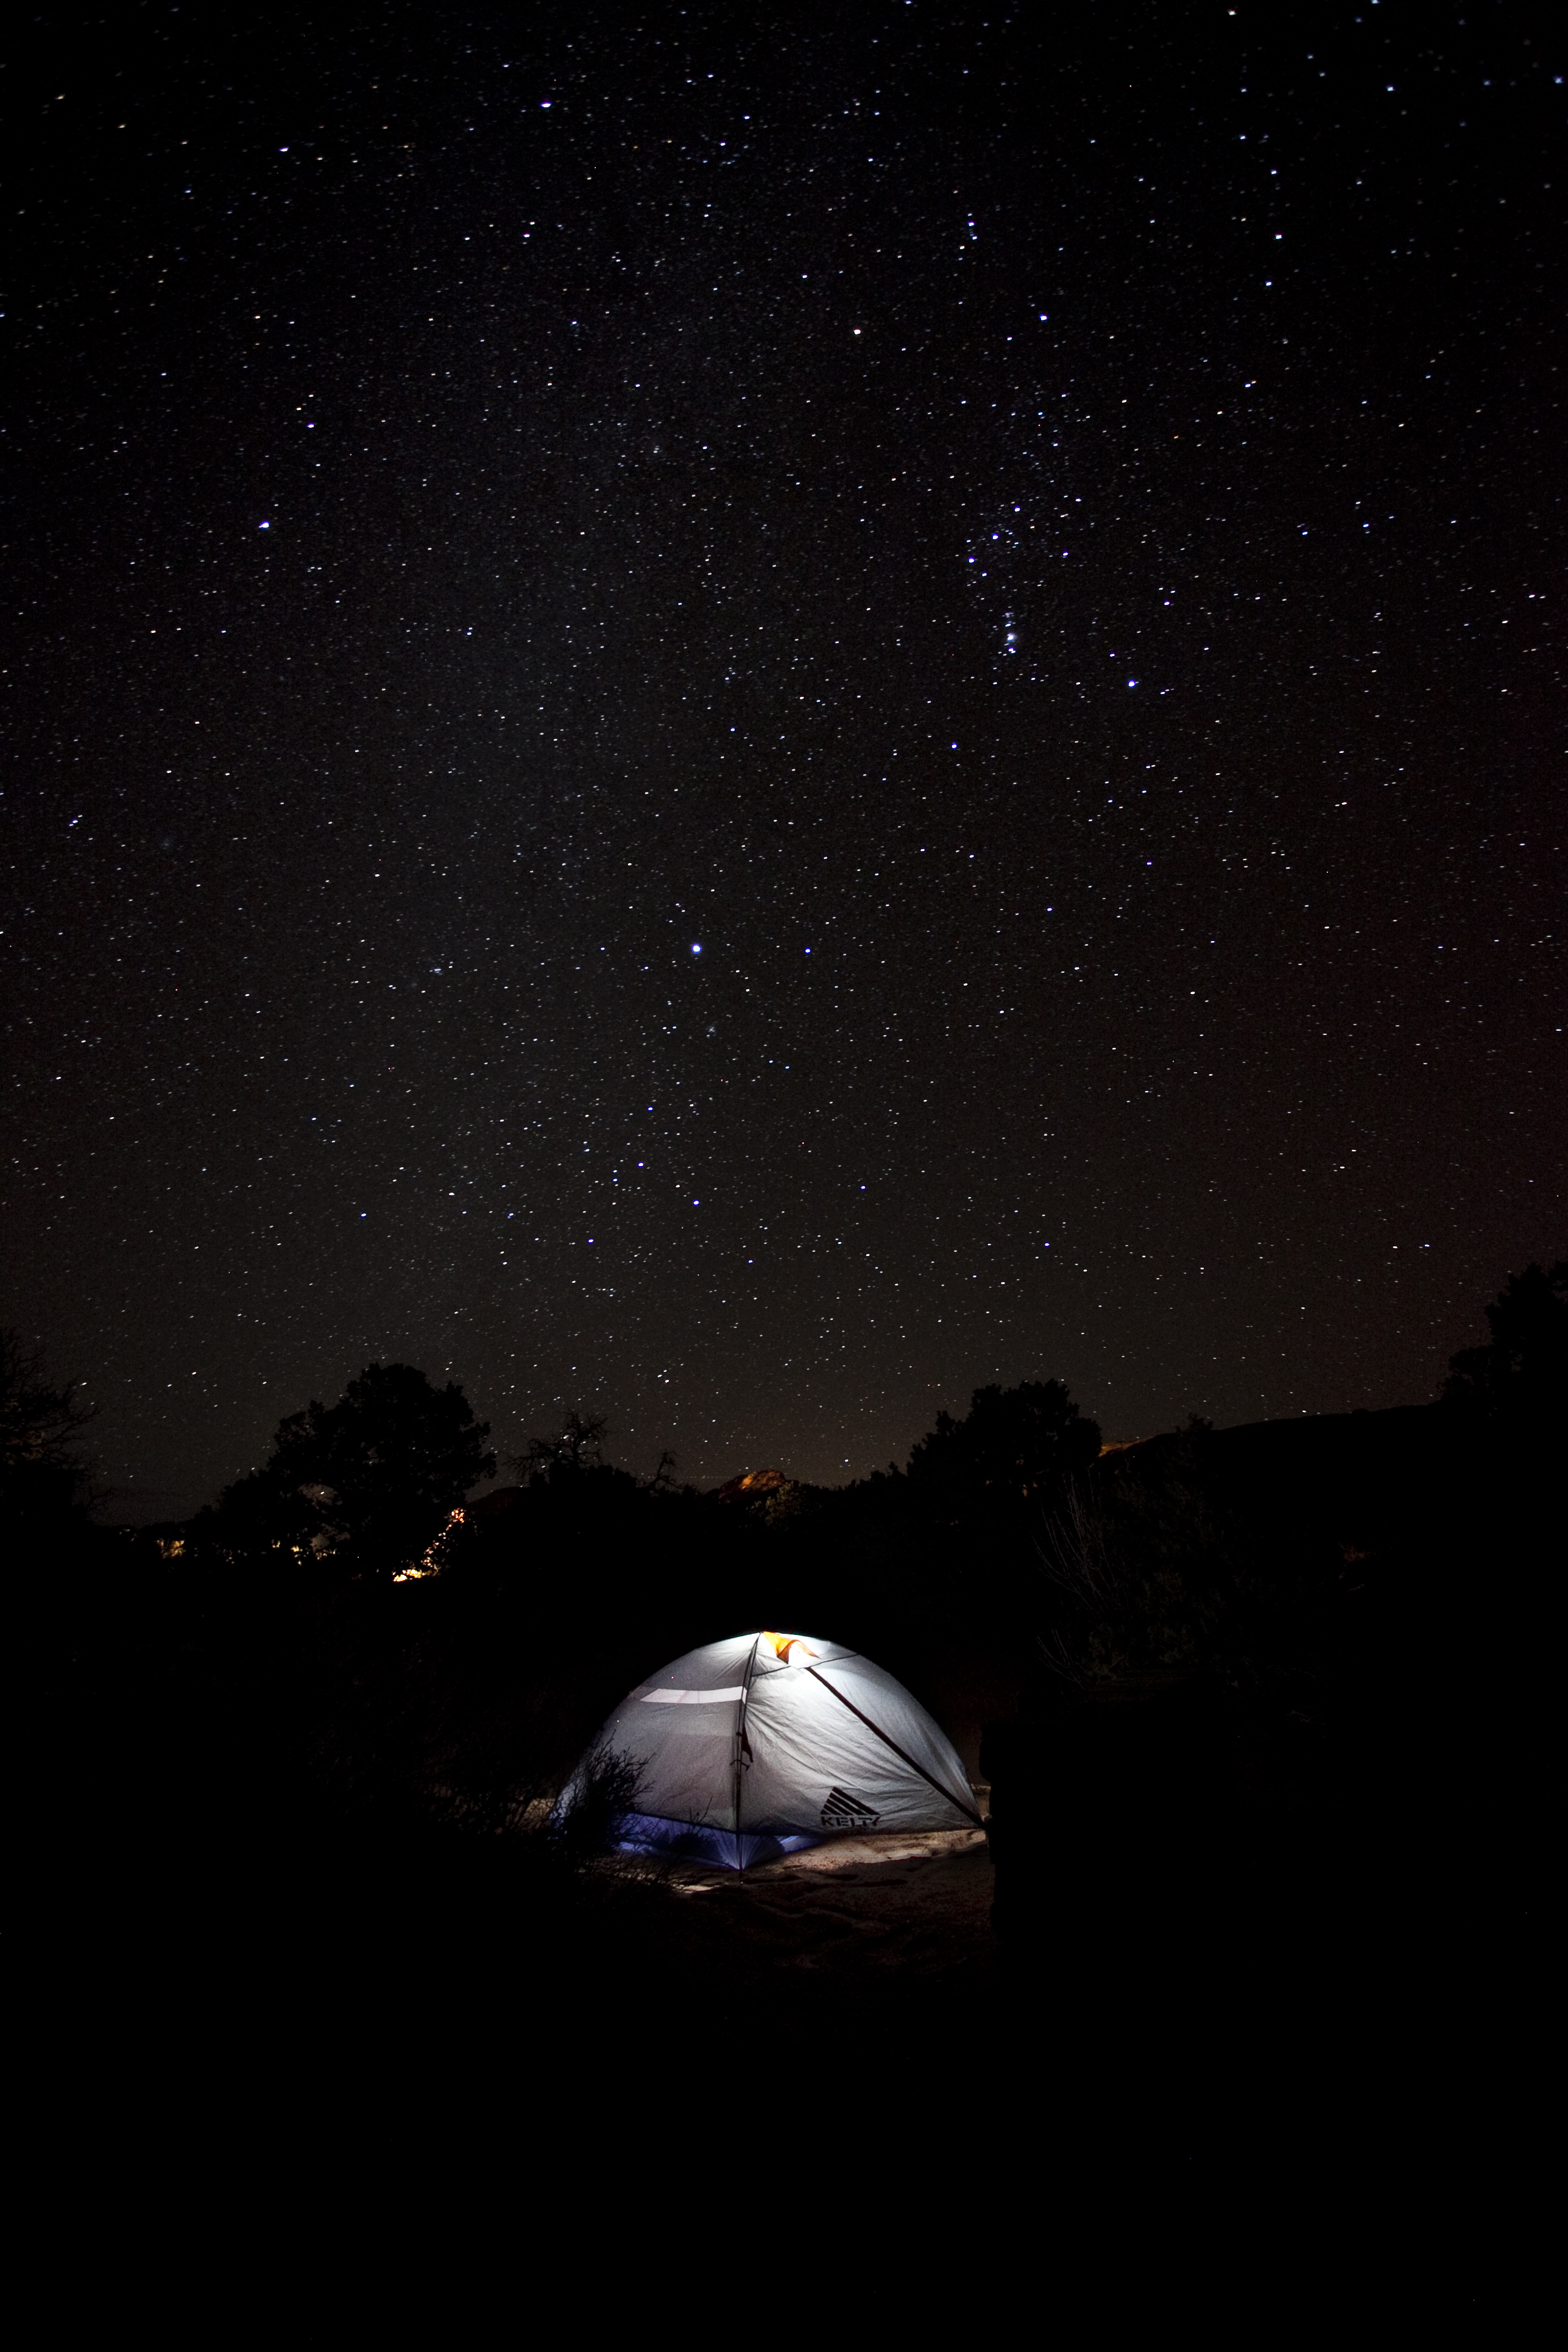 tent, camping, campsite, night, nature, starry sky